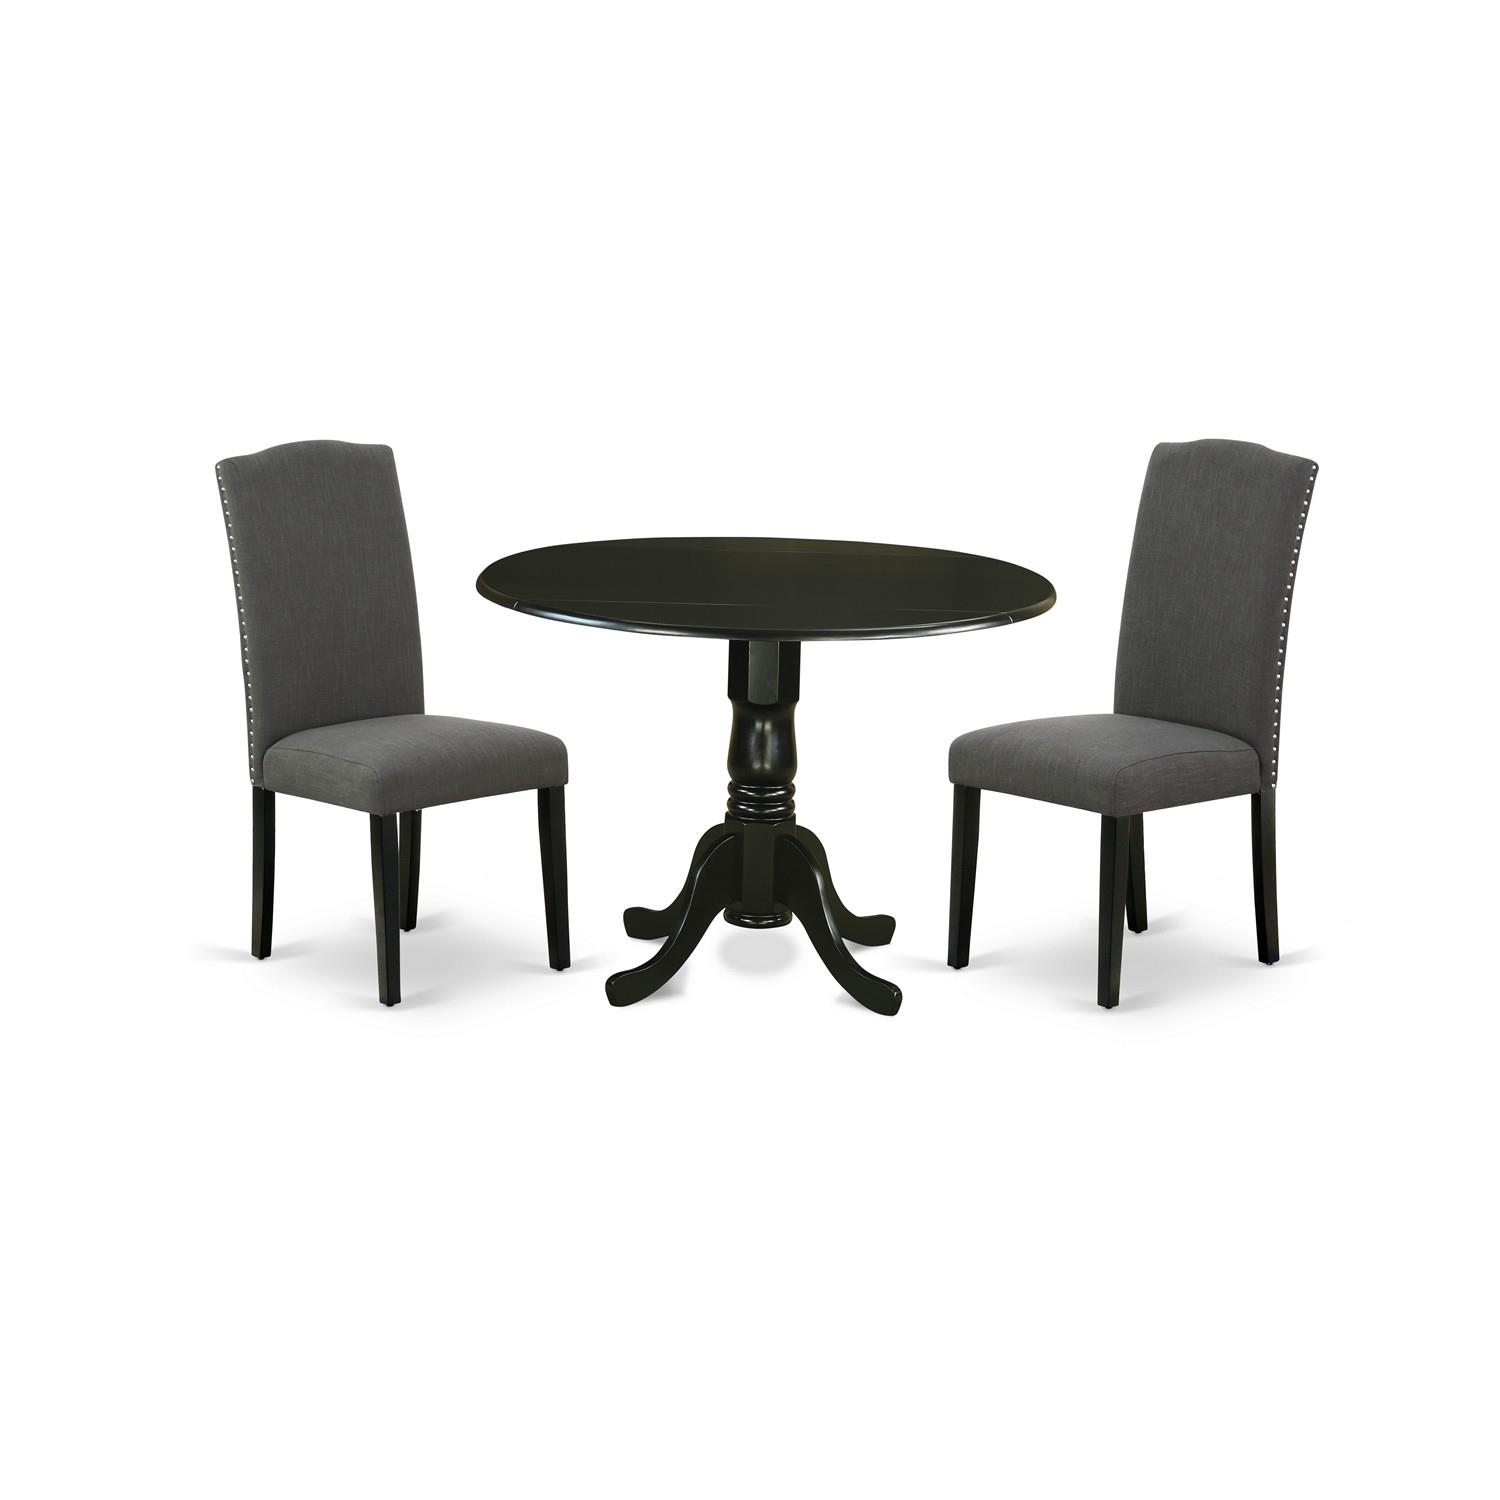 East West Furniture DLEN3-BLK-20 42 in. Dublin Round Dining Table with Two 9 in. Drop Leaves & Two Parson Chair with Black Leg & Linen Fabric - Dark